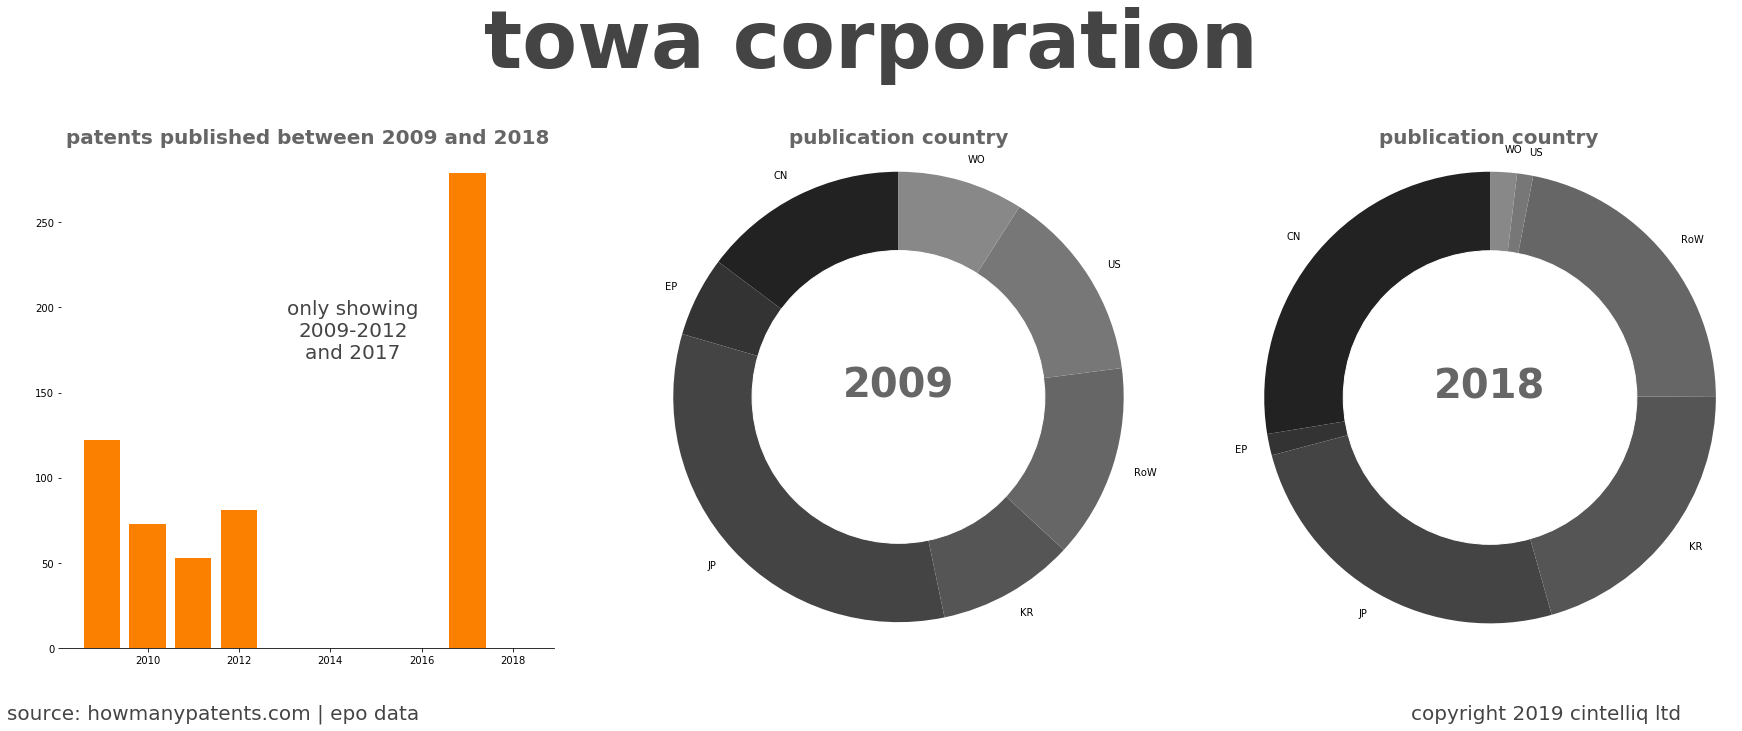 summary of patents for Towa Corporation